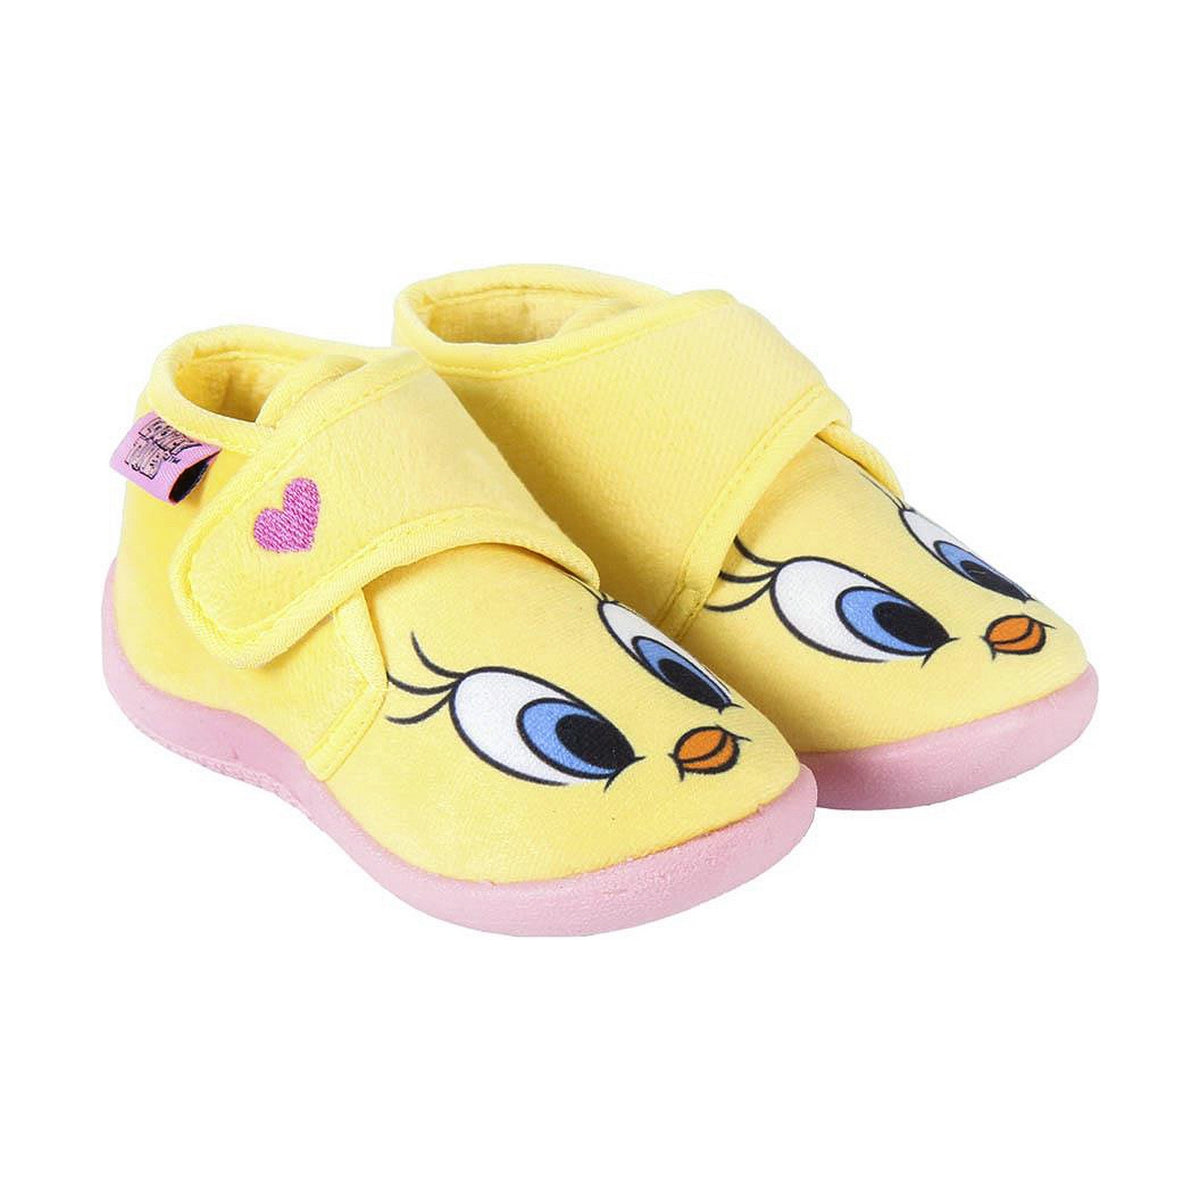 3D House Slippers Looney Tunes Yellow - Little Baby Shop